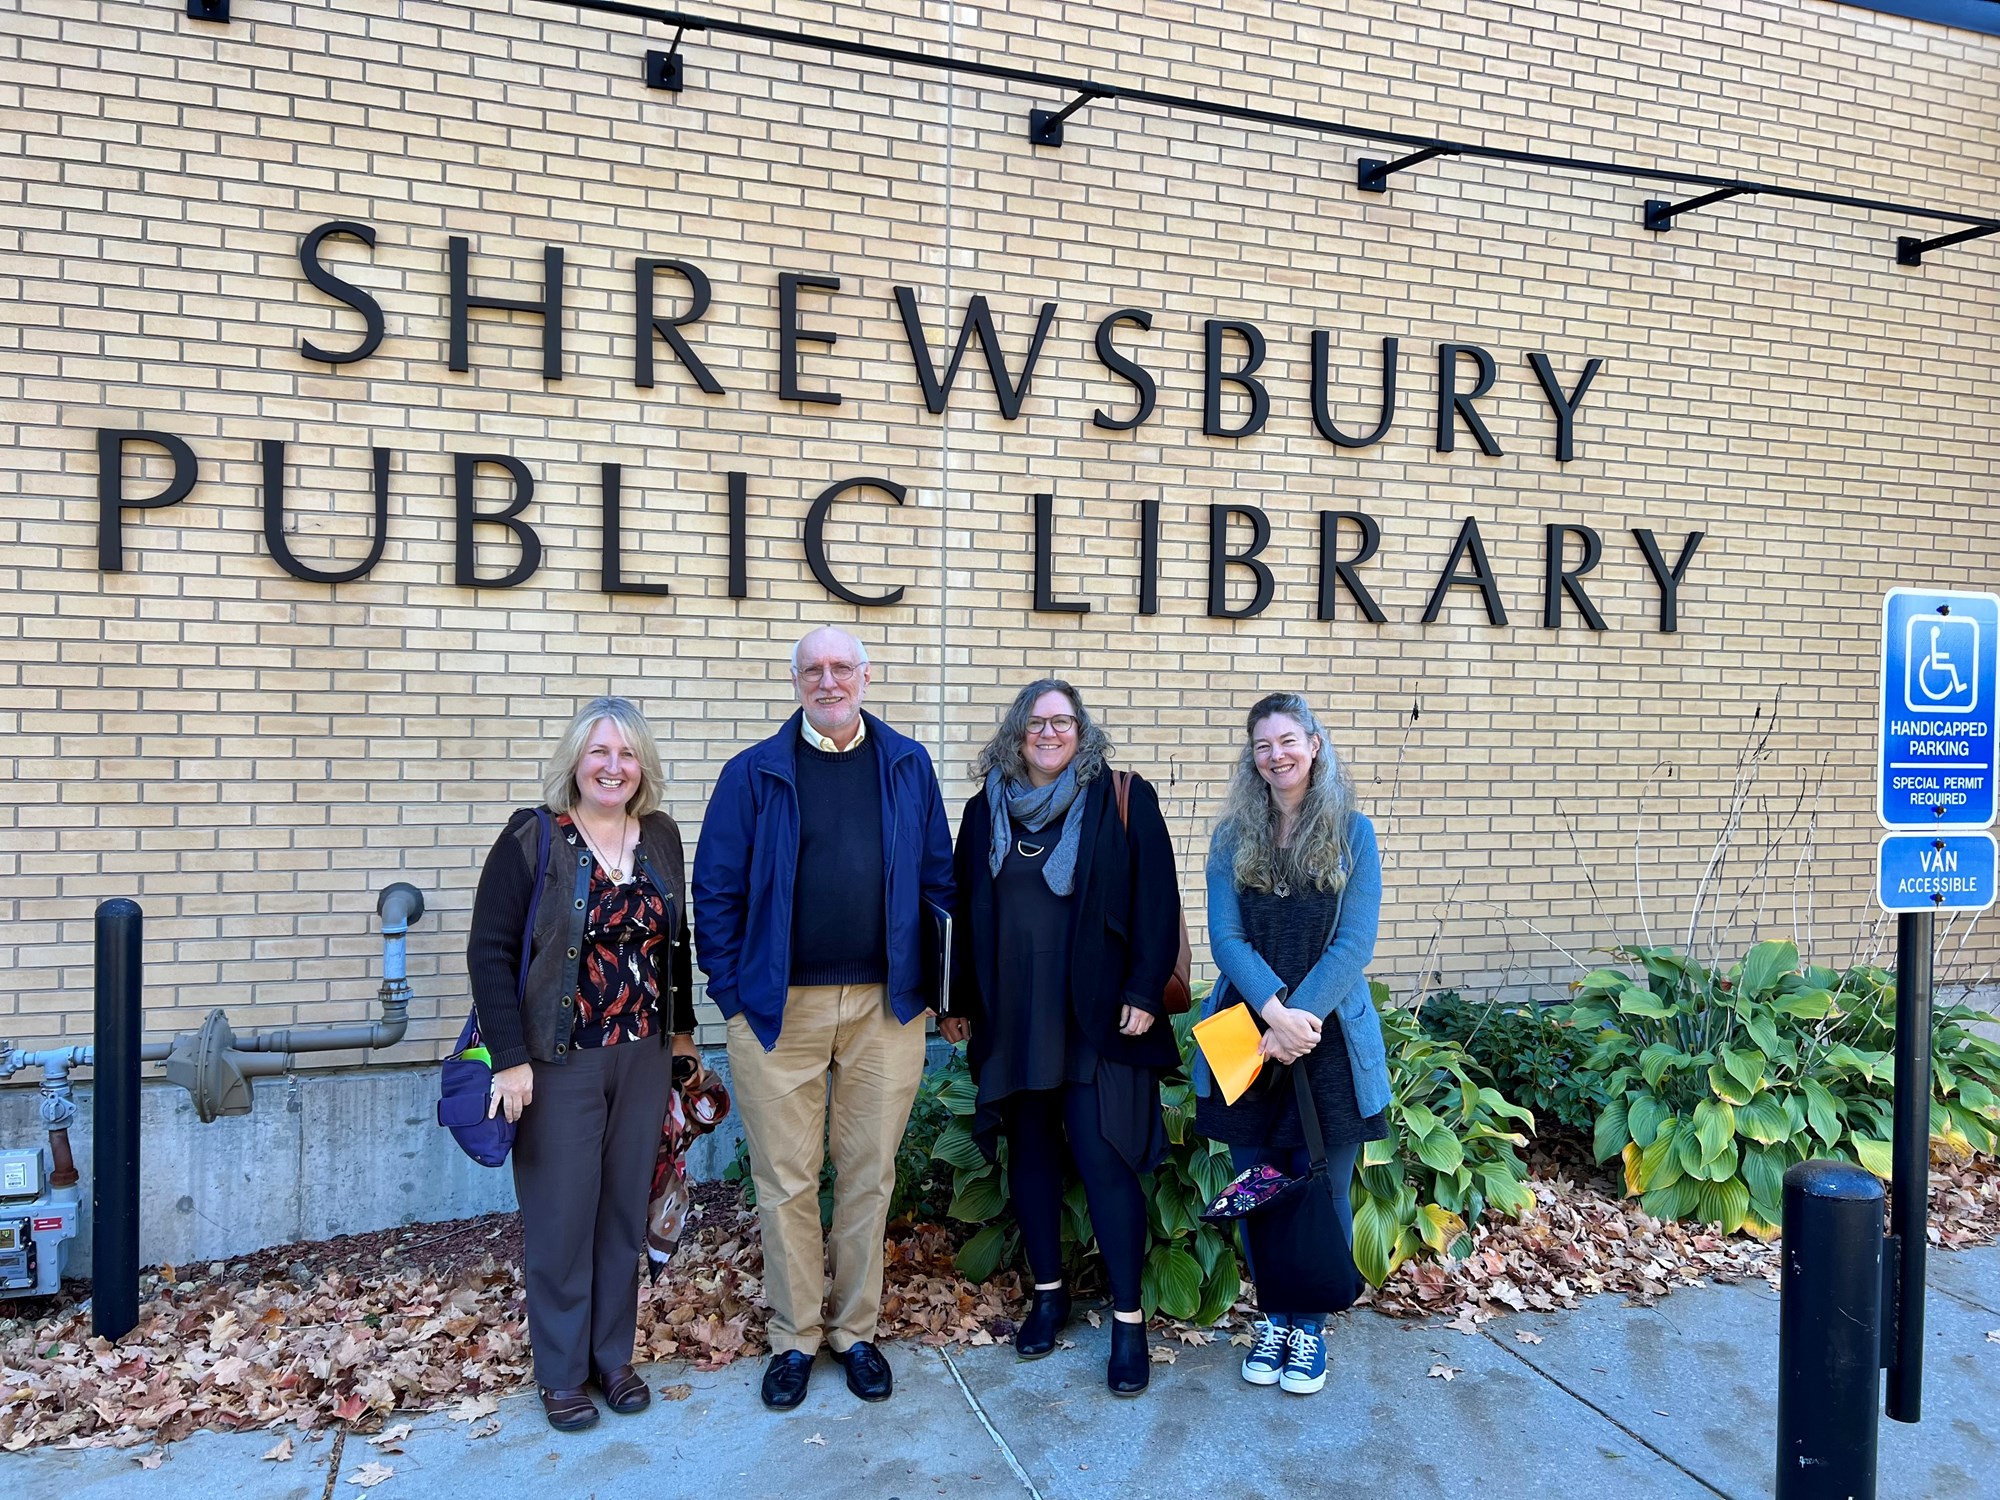 Russell Carrier with Lisa Downing, library director; Katy Wight, Vice President of the Forbes Library Board of Trustees; Molly Moss, assistant director